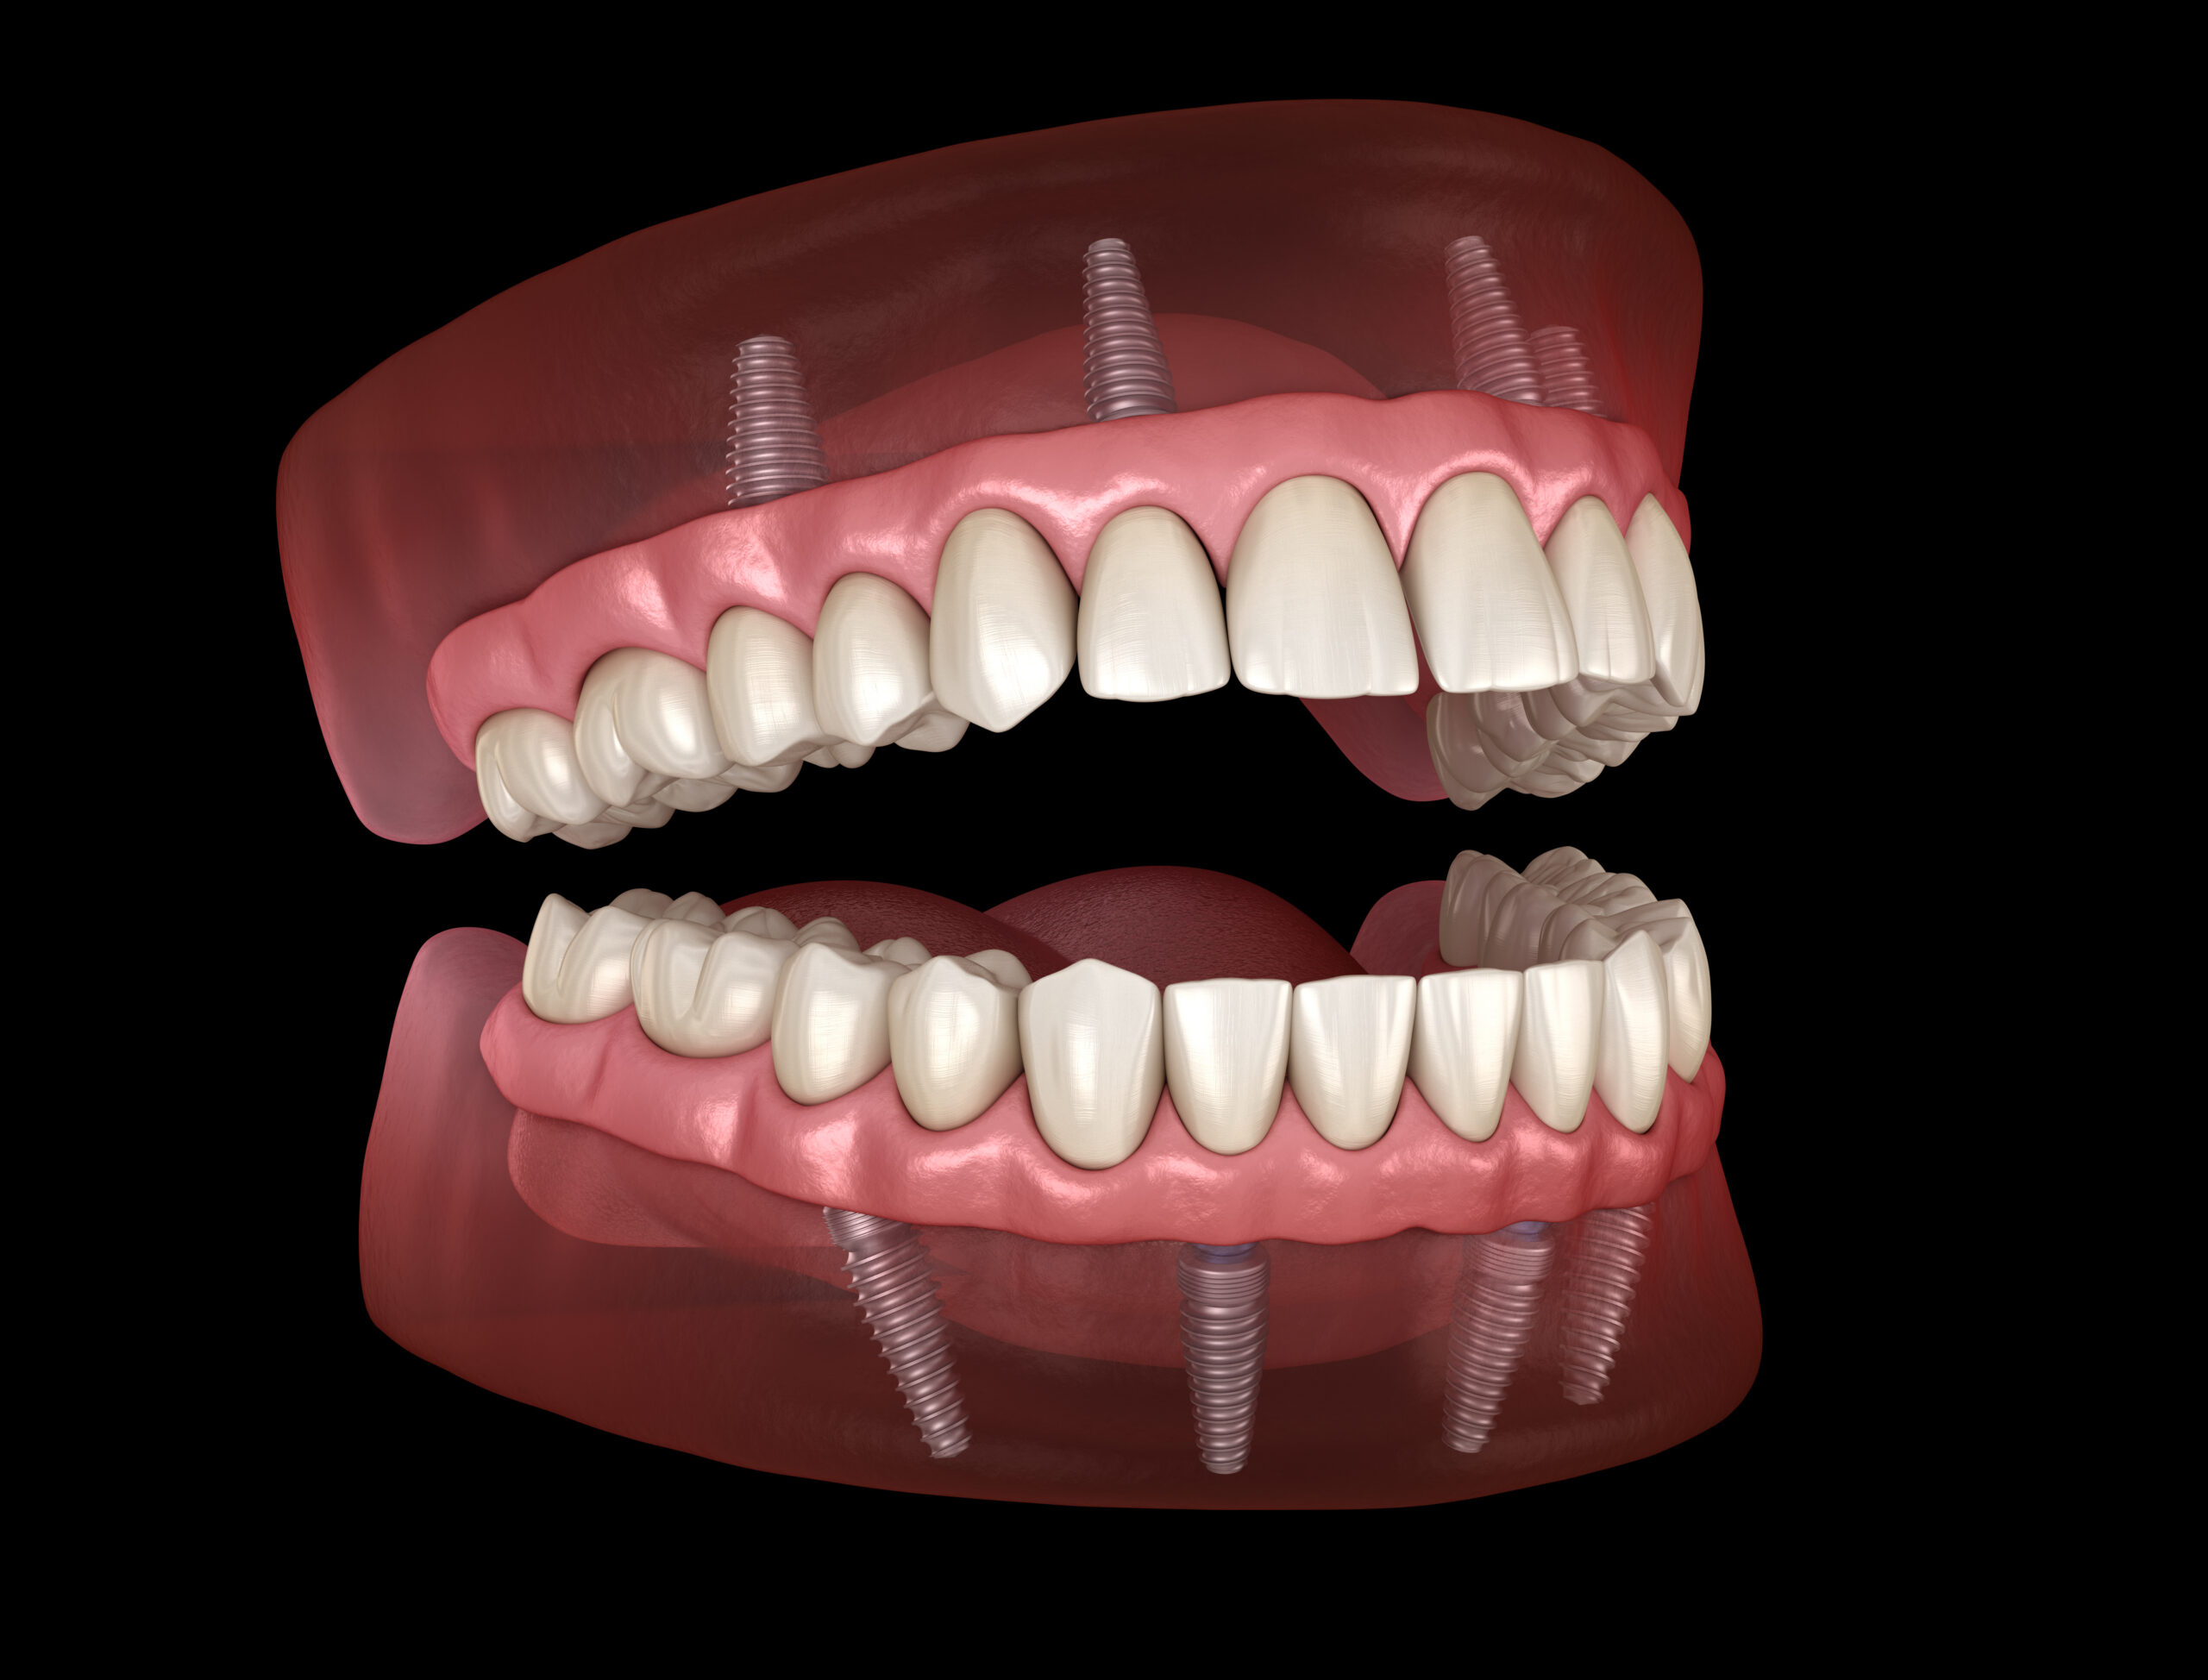 Maxillary and Mandibular prosthesis with gum All on 4 system supported by implants. Medically accurate 3D illustration of human teeth and dentures.